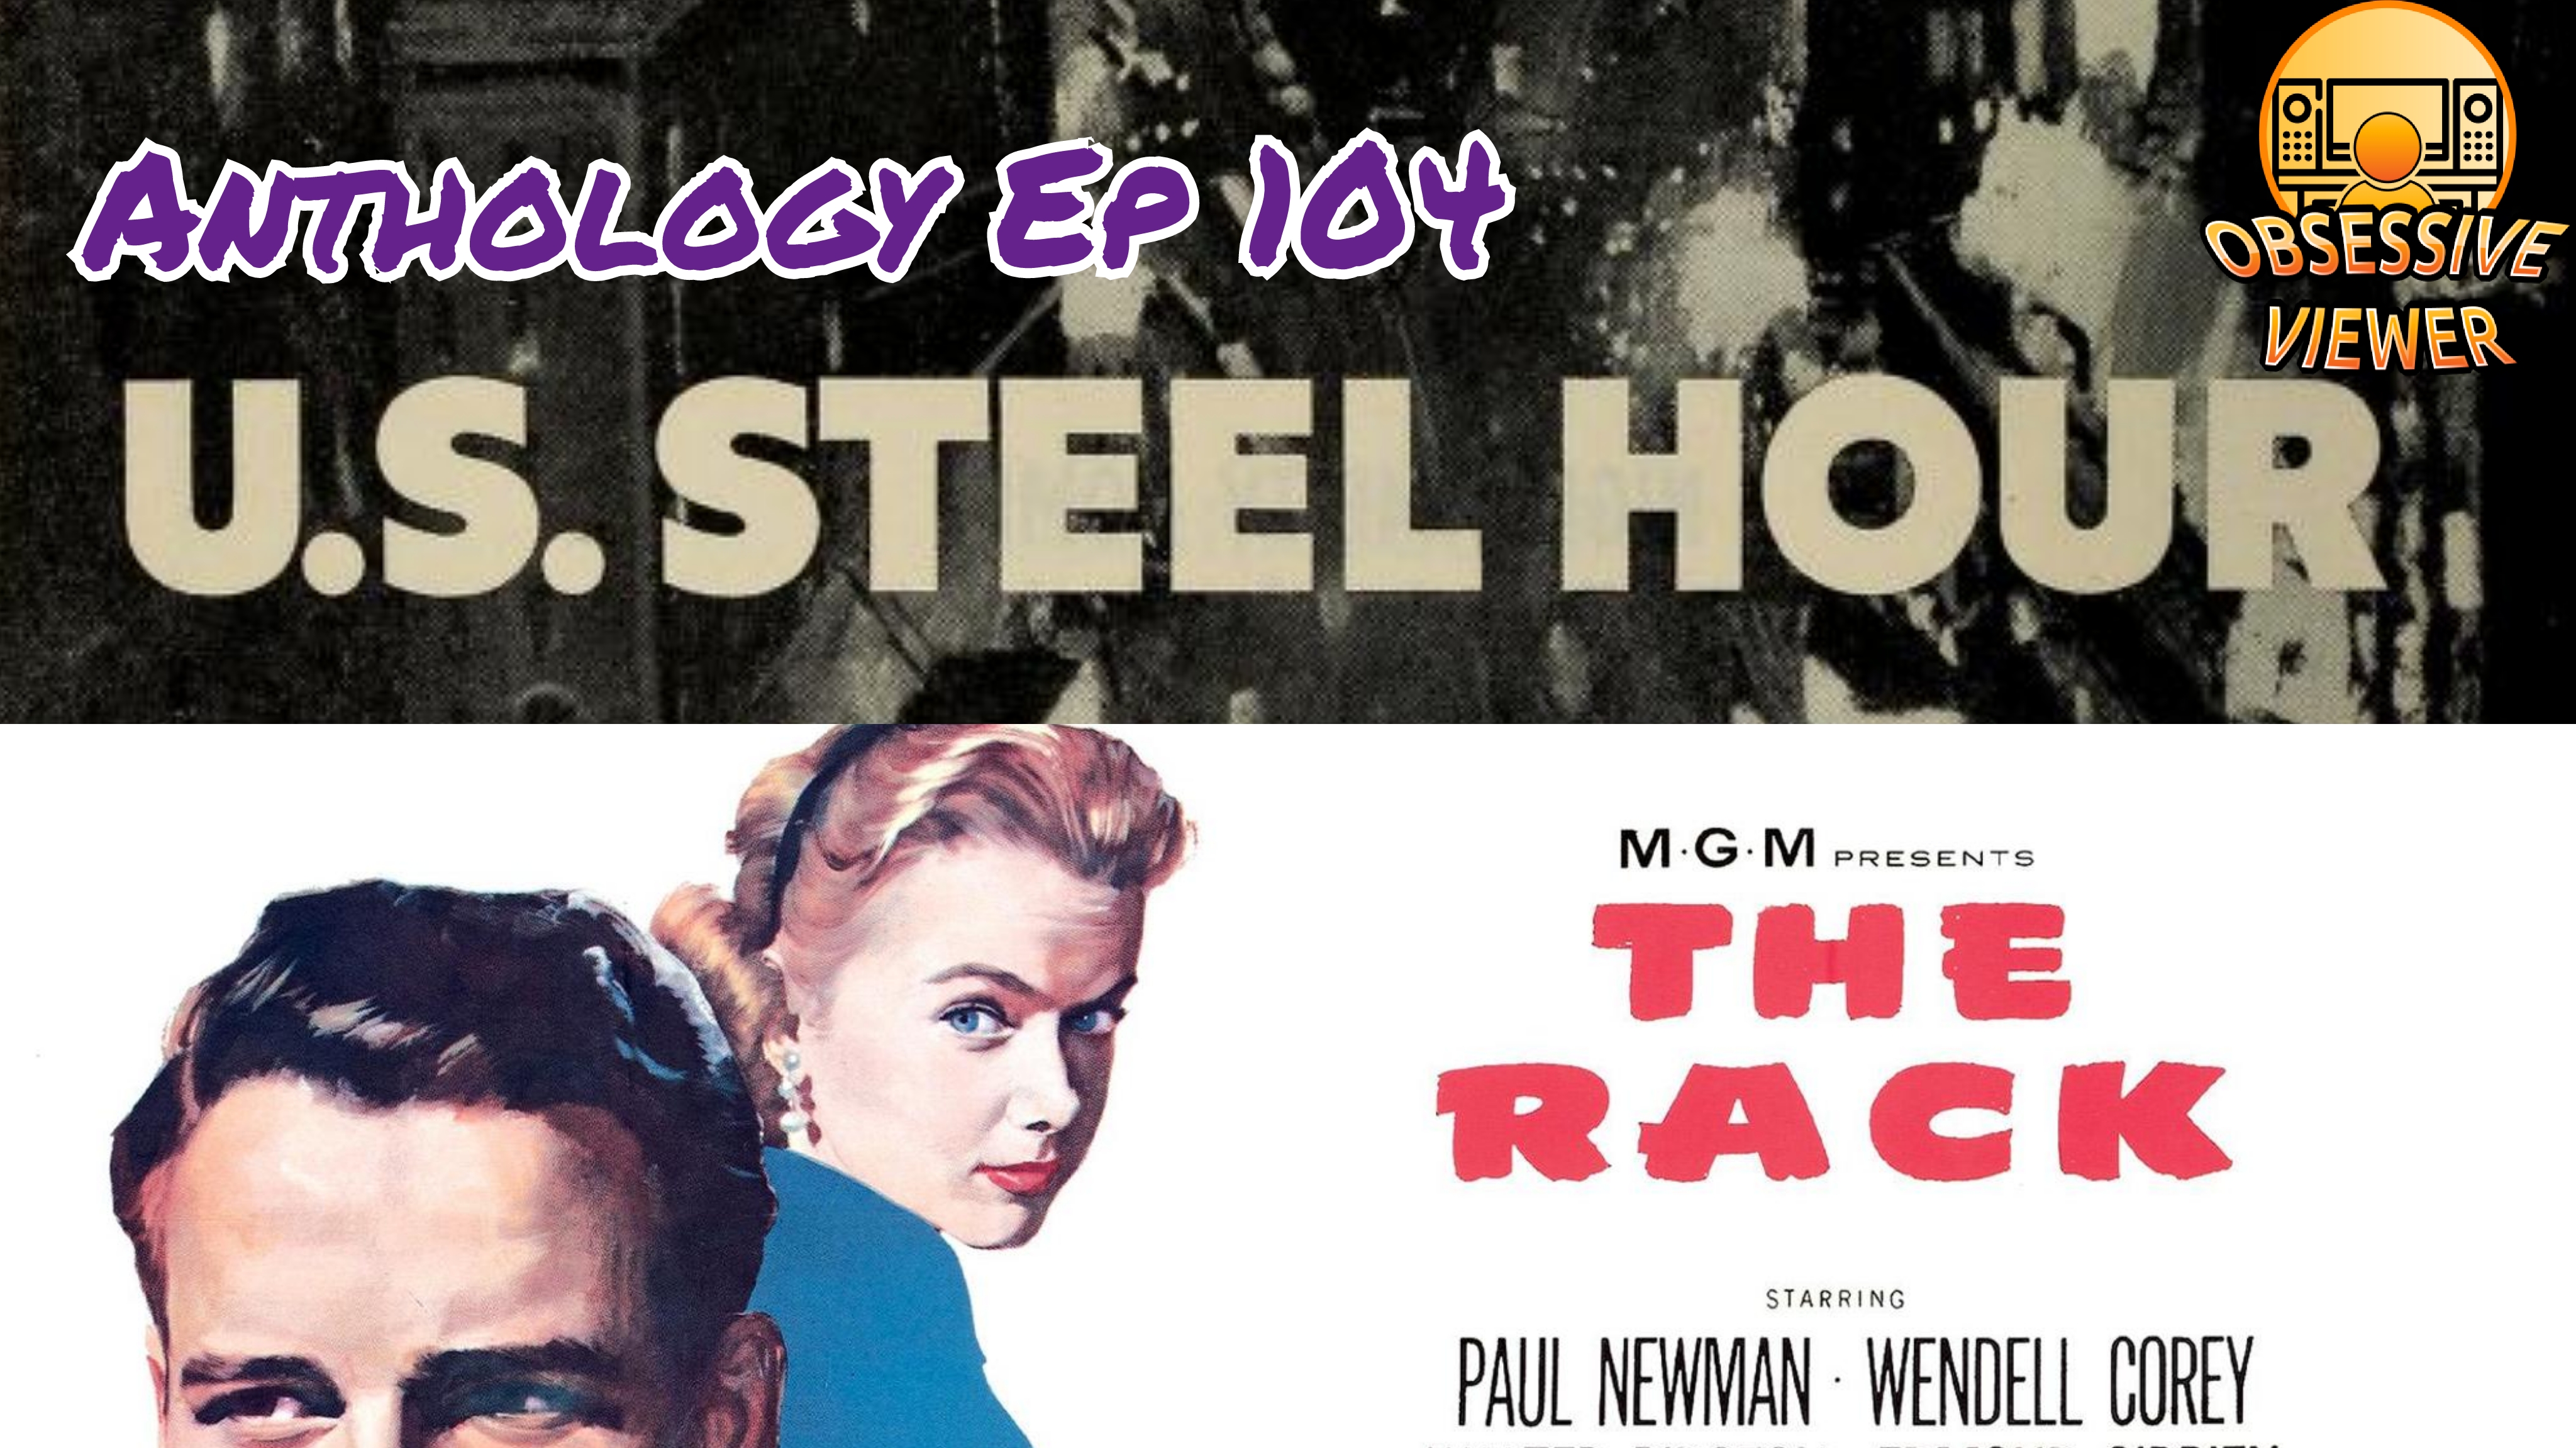 Anthology – 104 – The Rack (United States Steel Hour S02E16) + The Rack (1956) with Anthony “Tiny” Ramion (The Obsessive Viewer and Tower Junkies Podcasts)